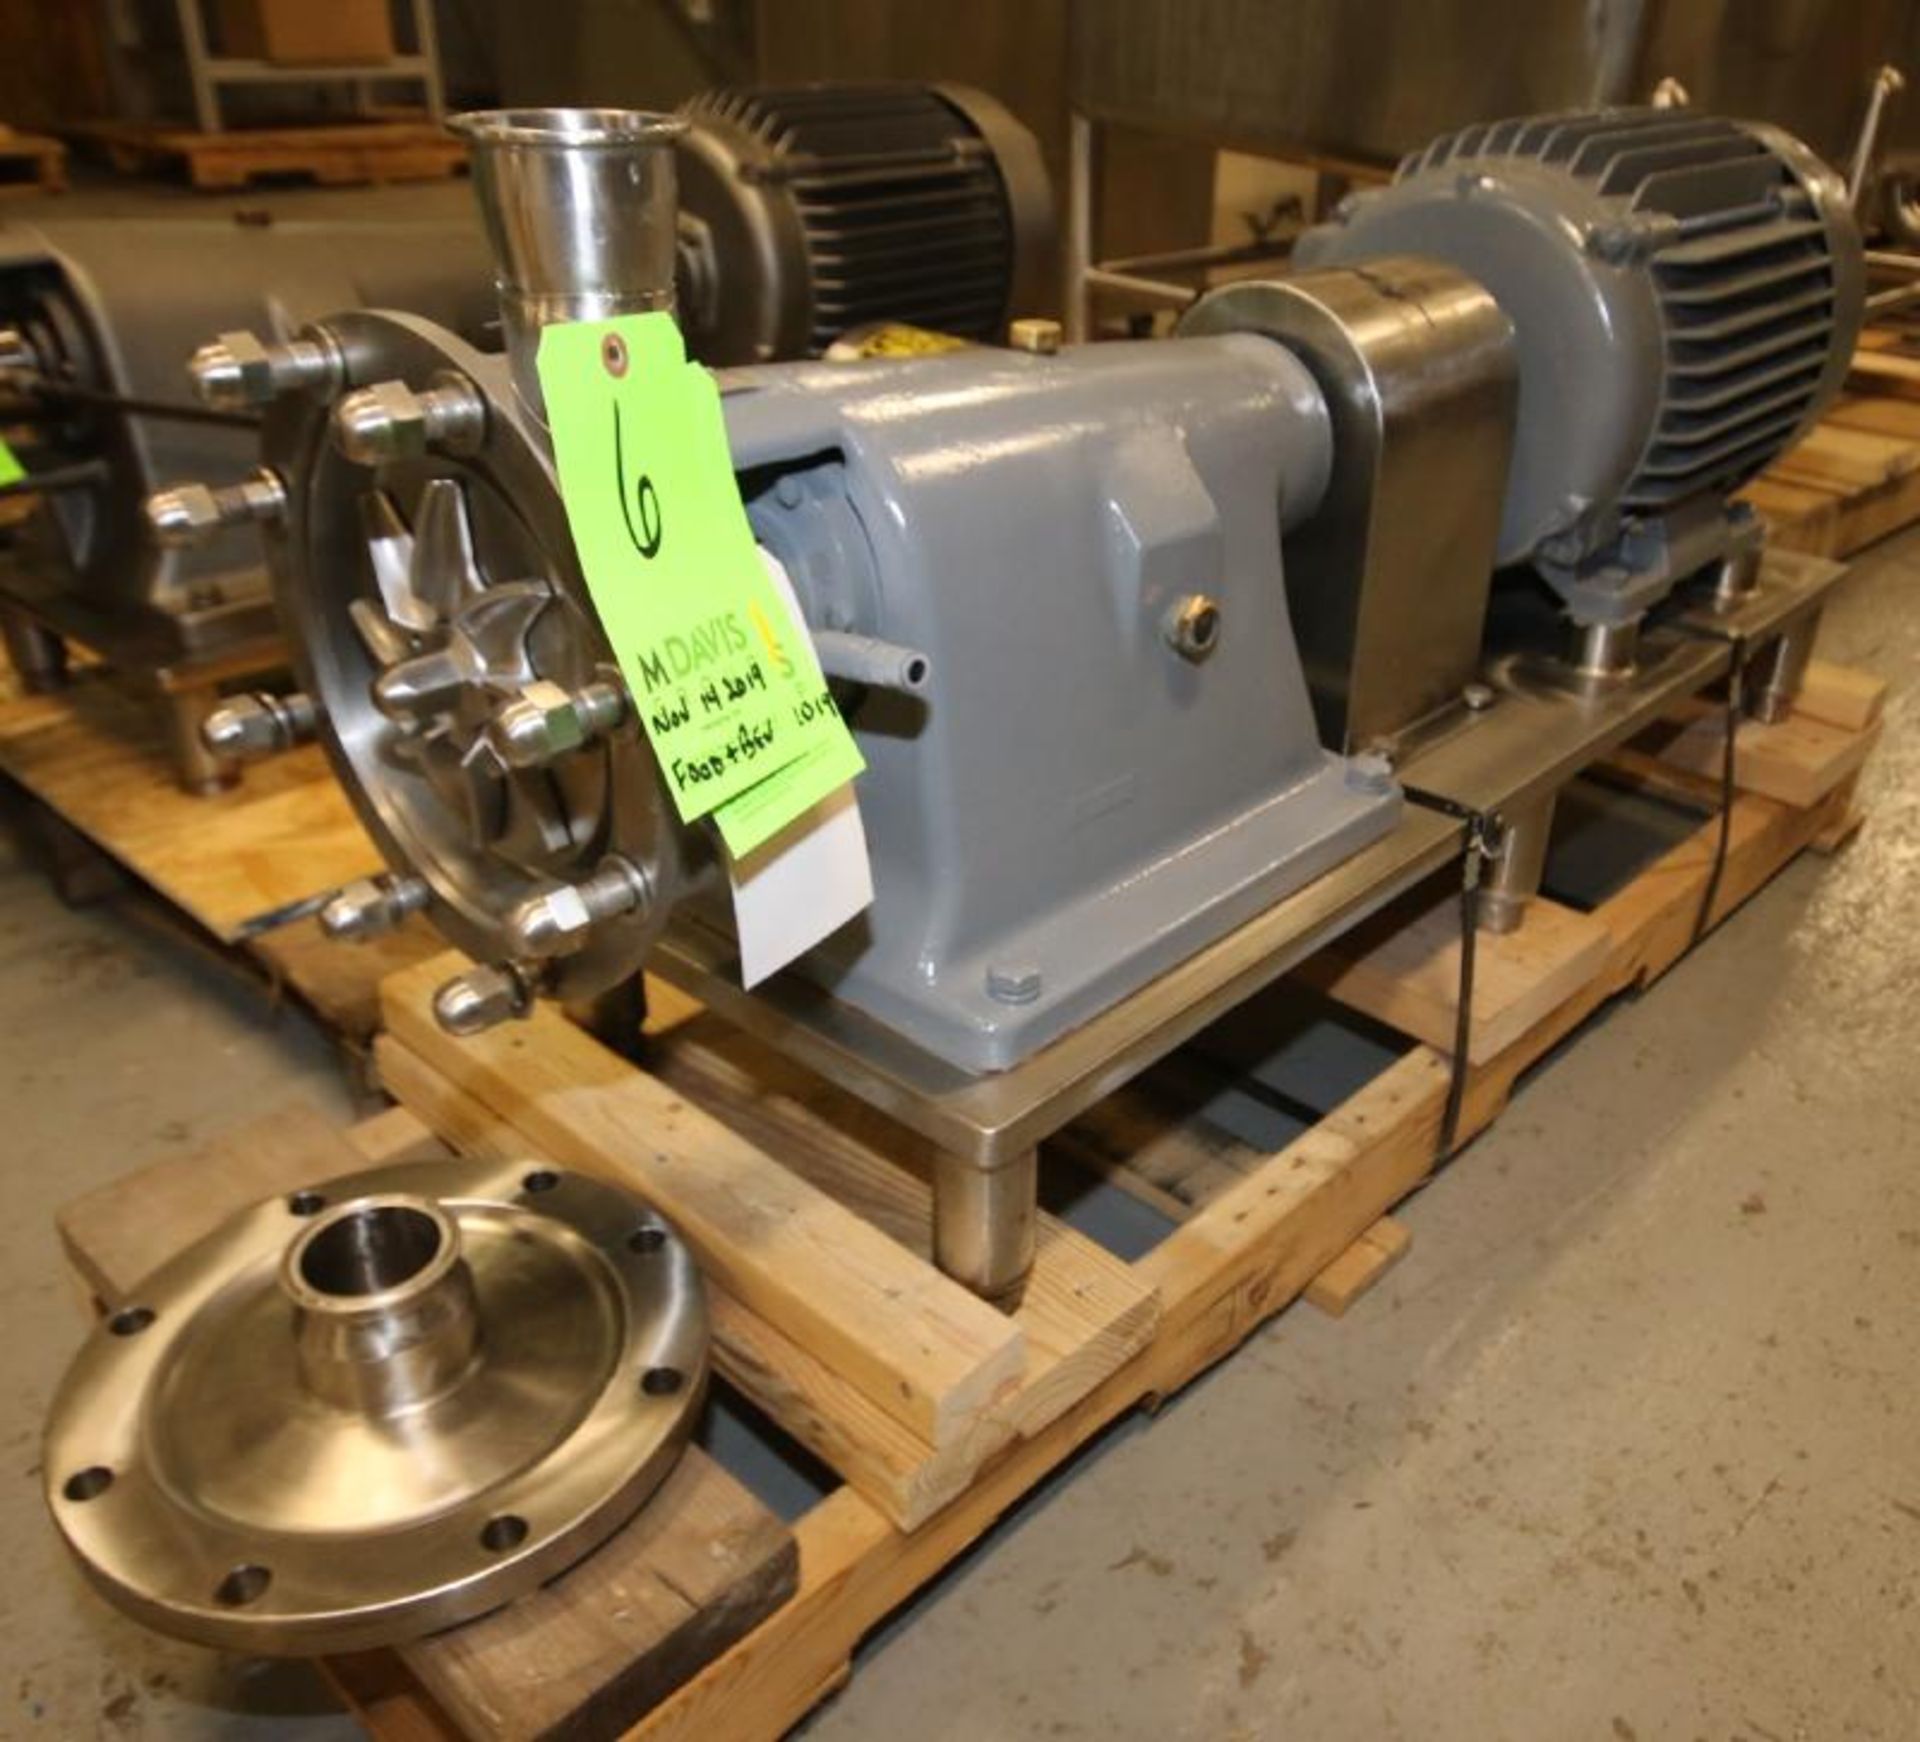 Fristam Multi Stage High Pressure S/S Centrifugal Pump, Model FM312-175, SN 72255, with 2.5" Clamp